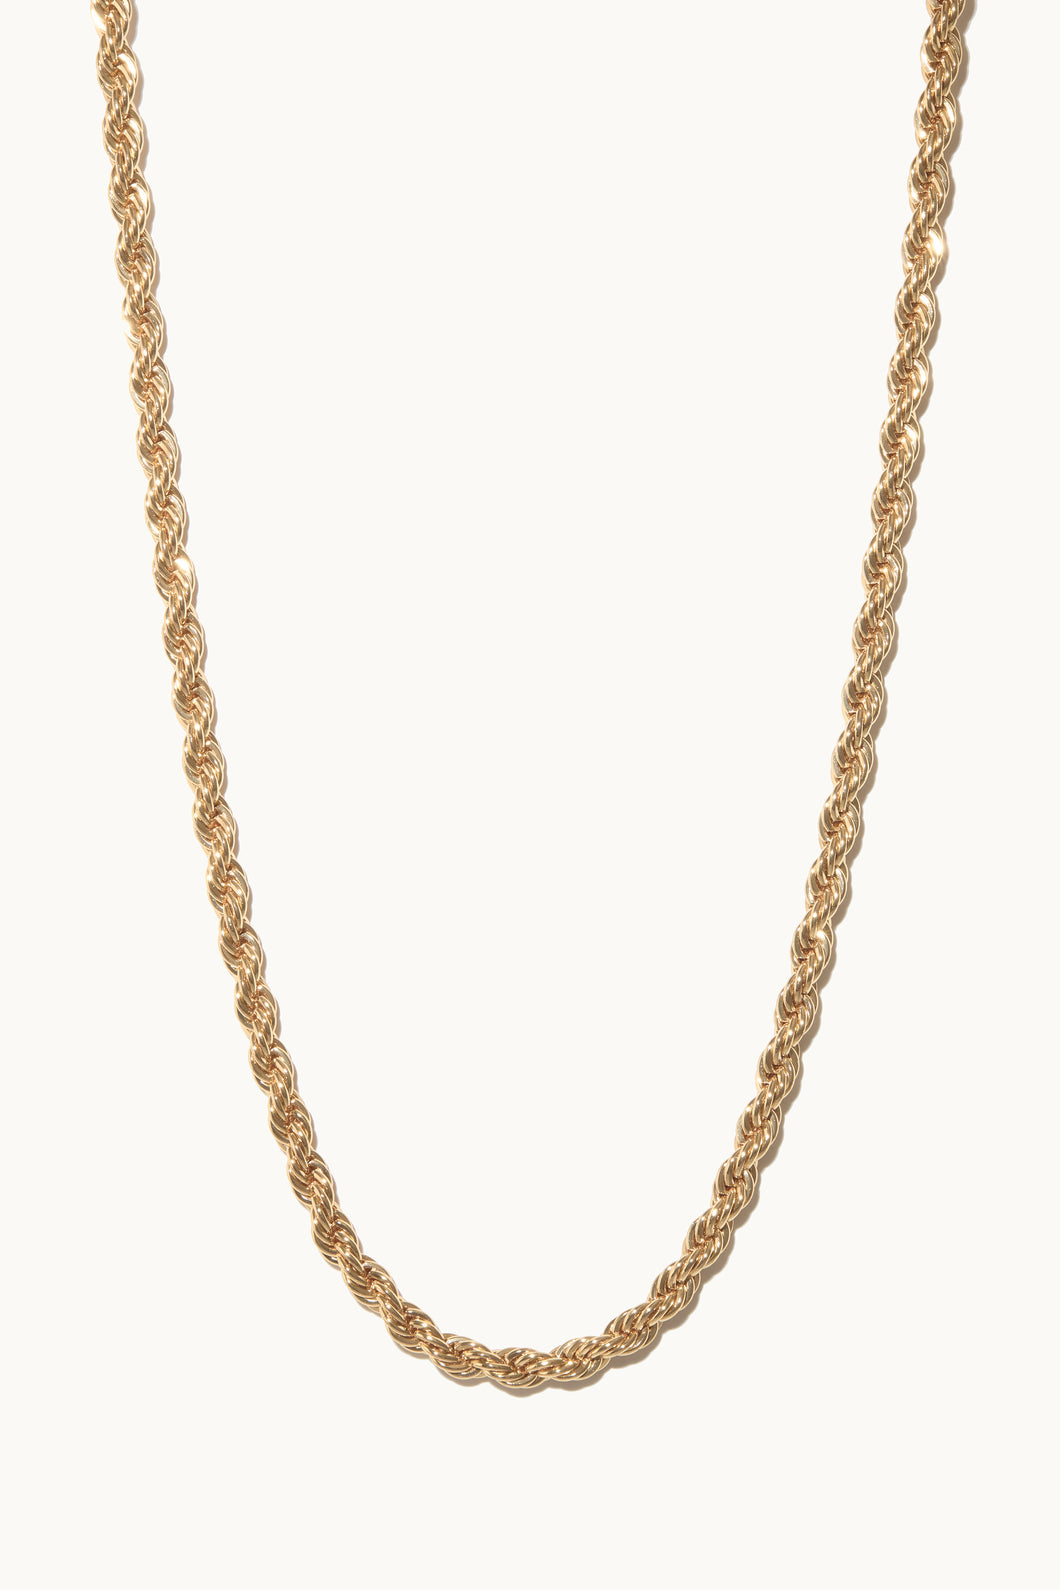 Michicant Necklace